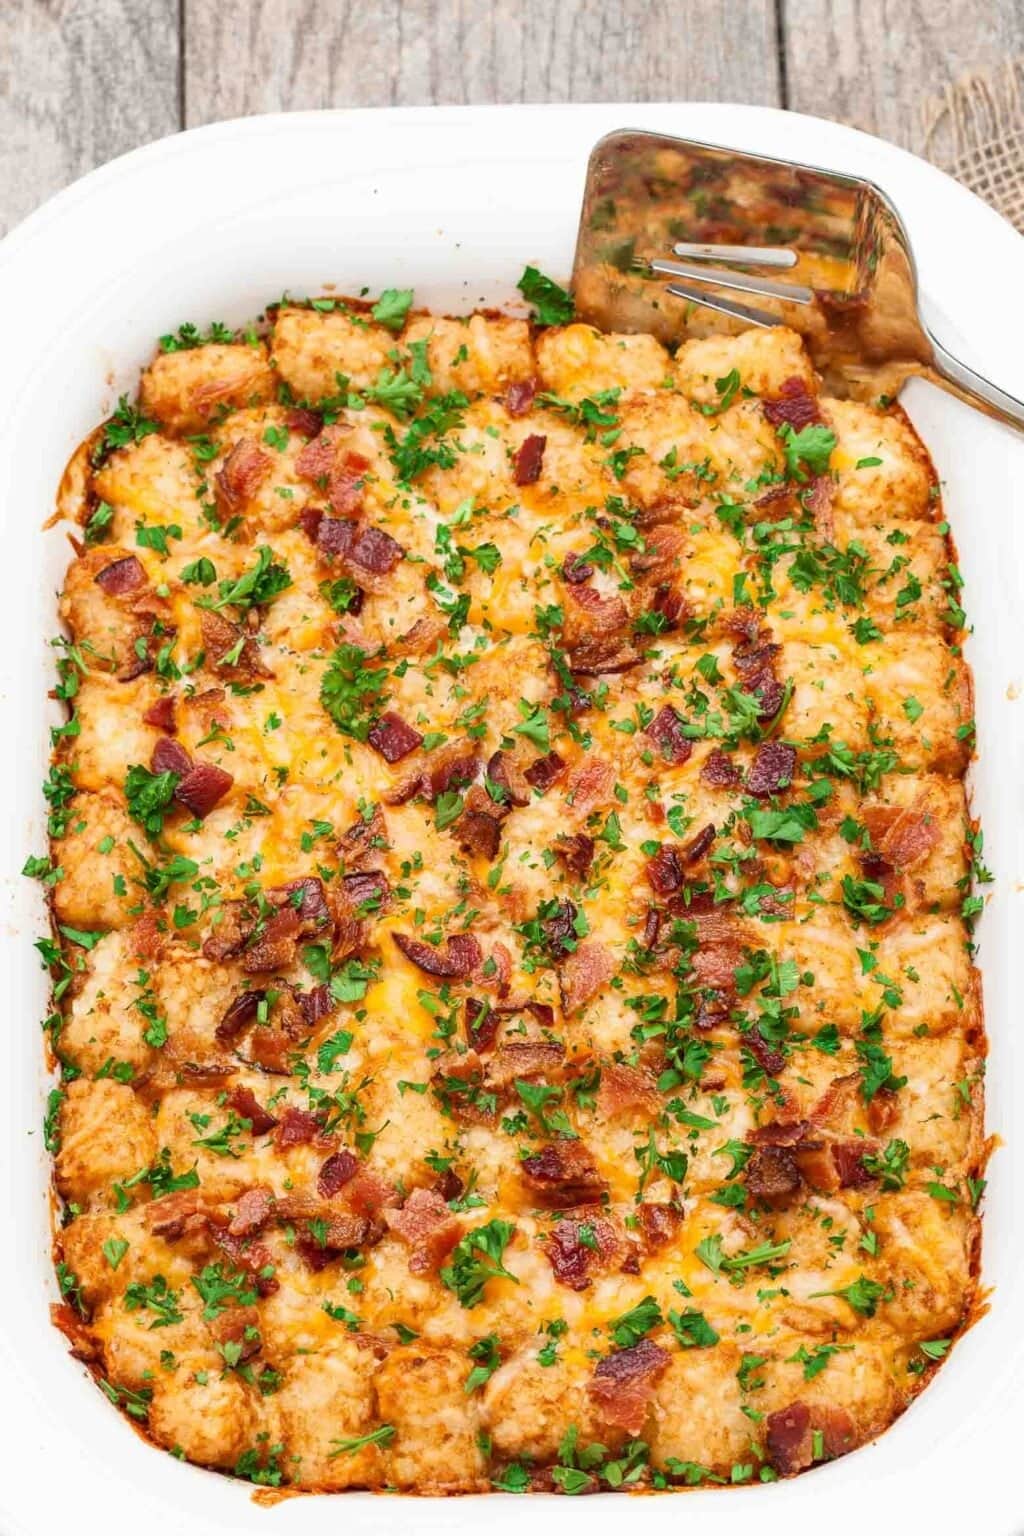 Cheesy Tater Tot Breakfast Casserole with bacon, eggs, sausage, and, of course, tater tots